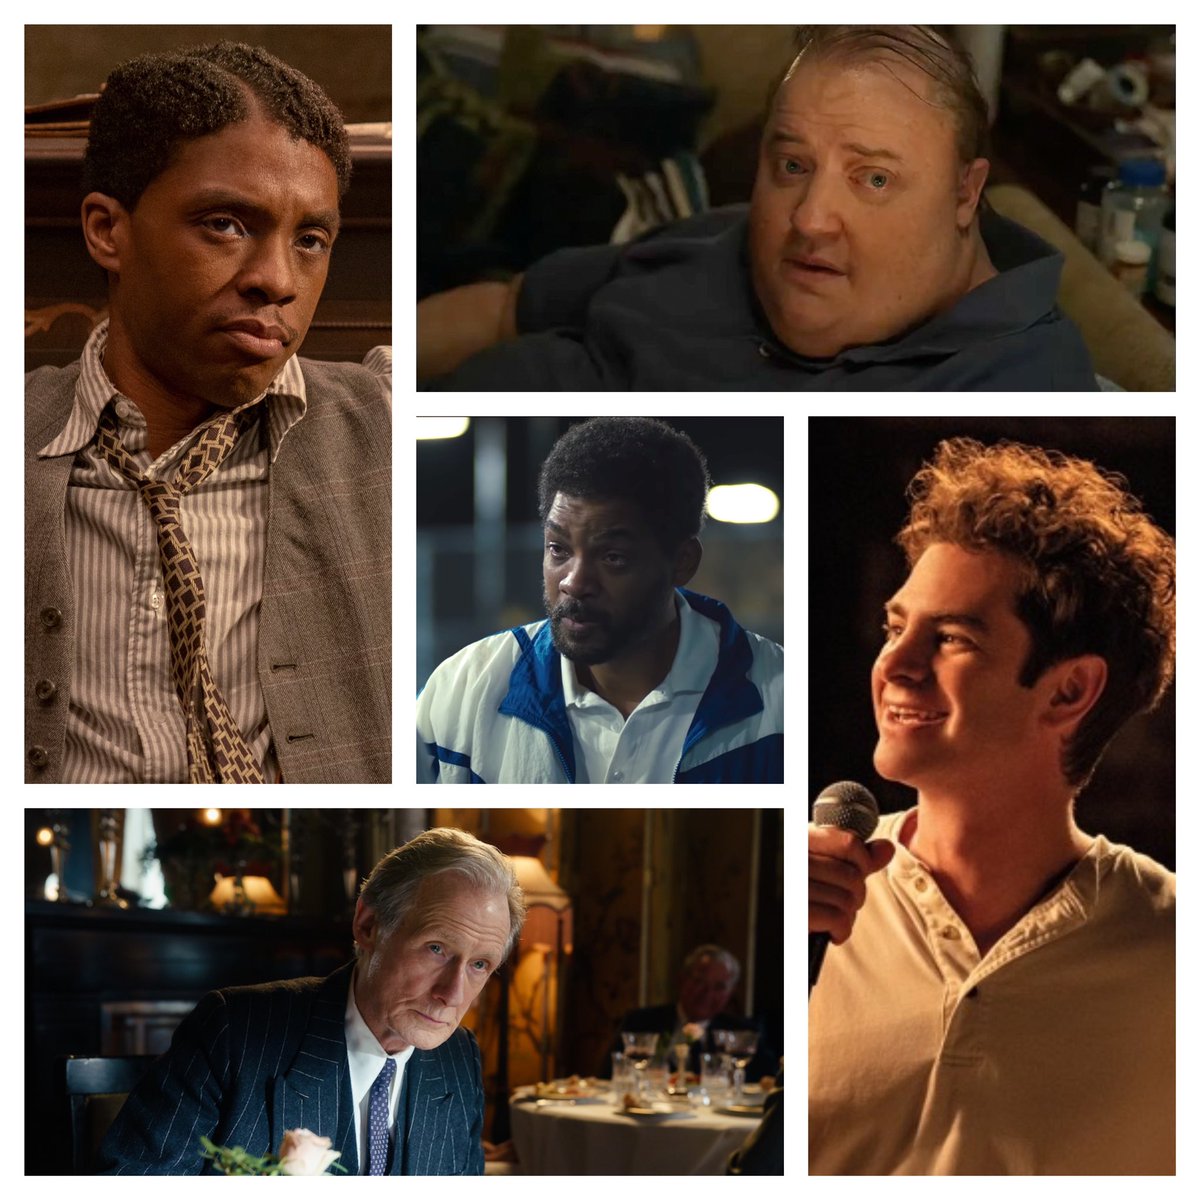 Here are my nominees for Best Actor of the 2020s nominees:

Chadwick Boseman- Ma Rainey’s Black Bottom
Andrew Garfield- tick, tick… BOOM!
Brendan Fraser- The Whale
Bill Nighy- Living
Will Smith- King Richard

And the Oscar would go to… Chadwick Boseman! https://t.co/YY7MckA2wu